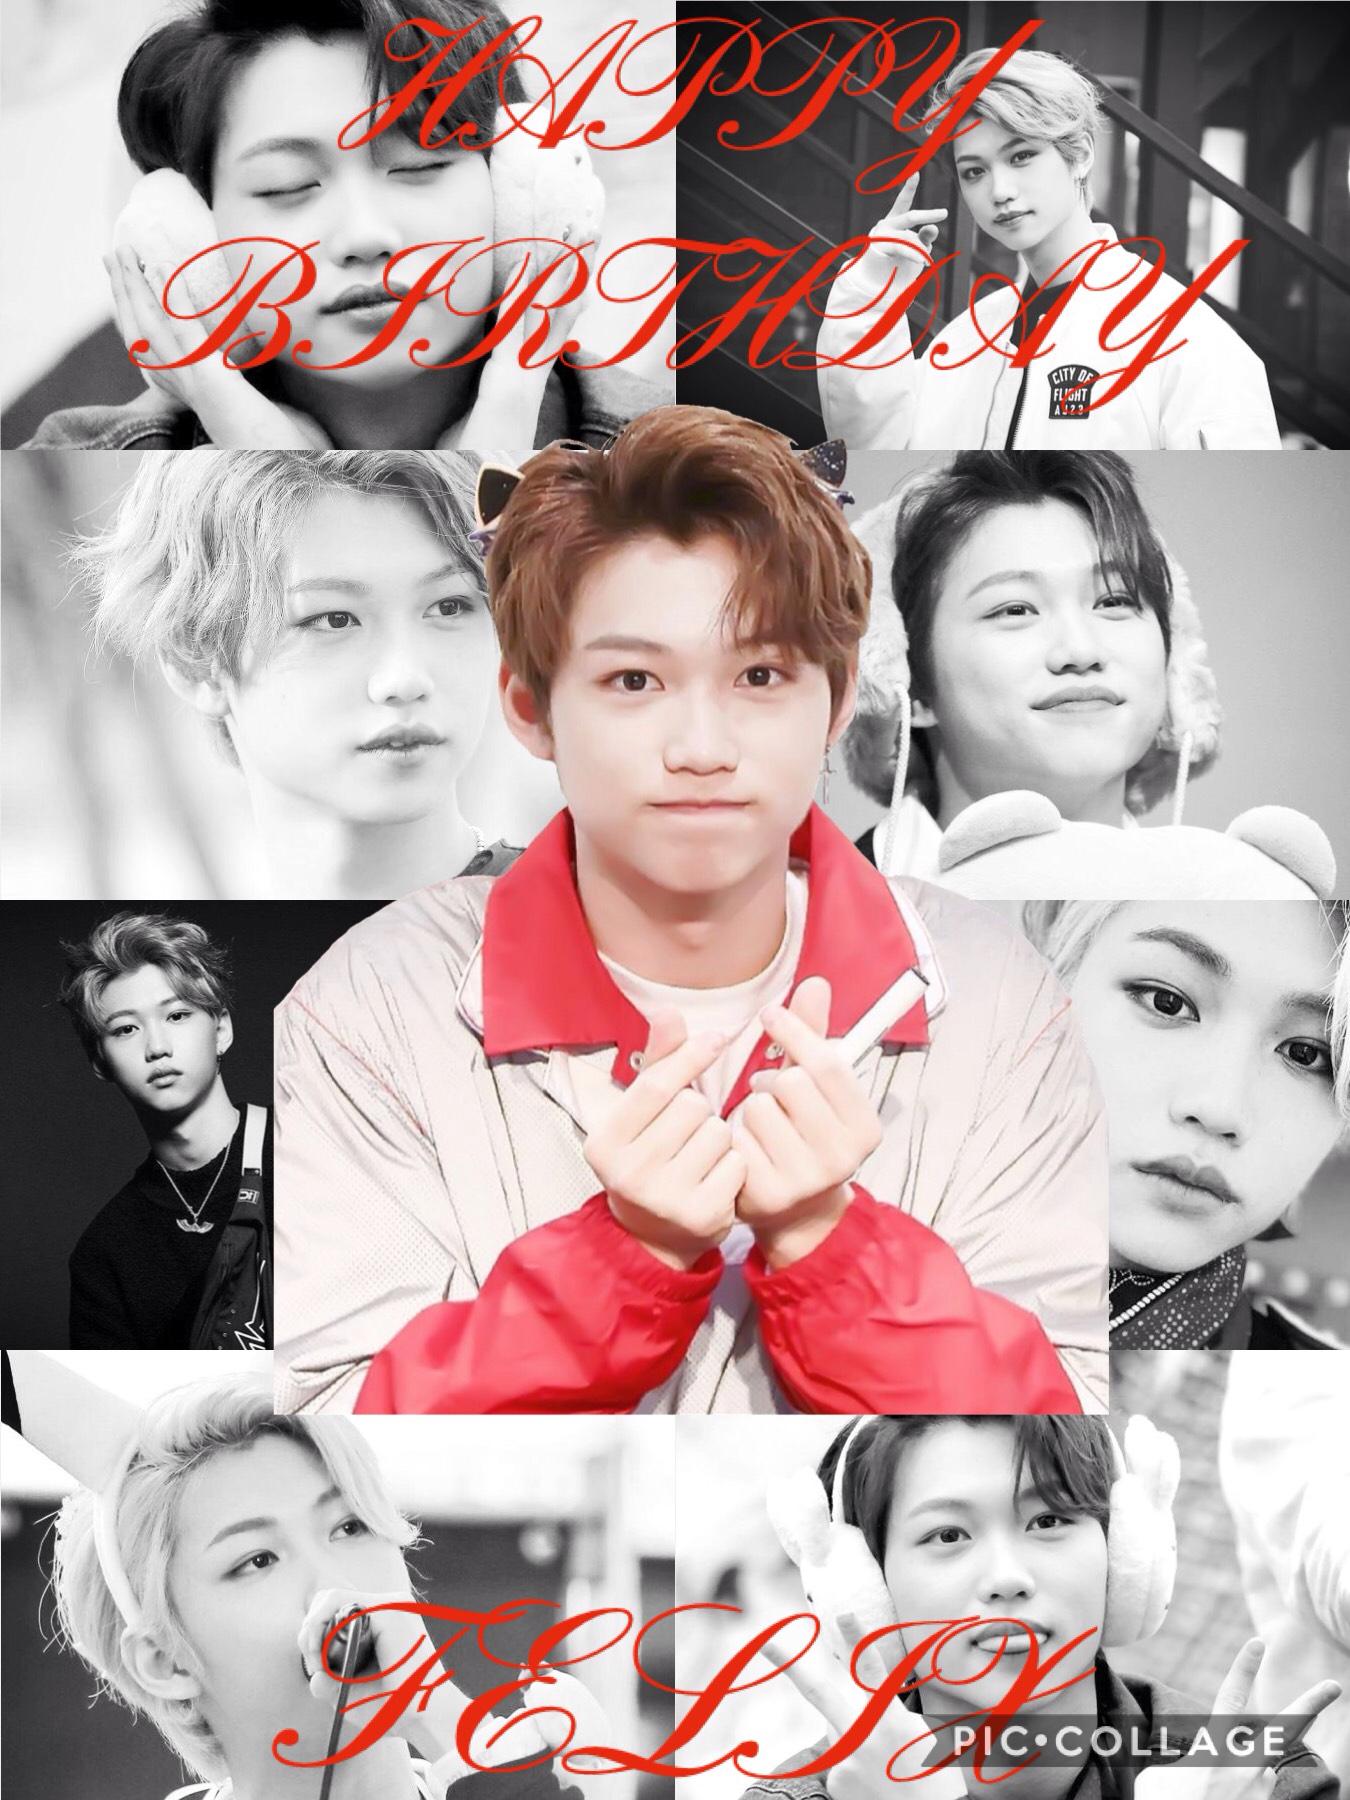 I just started listening to Stray Kids 3 days ago and I already know his birthday, I have a problem. Sorry that I haven't posted an actual edit, I will try to soon. Anyways, HAPPY BIRTHDAY TO THIS BEAUTIFUL AMAZING HUMAN BEING!!!